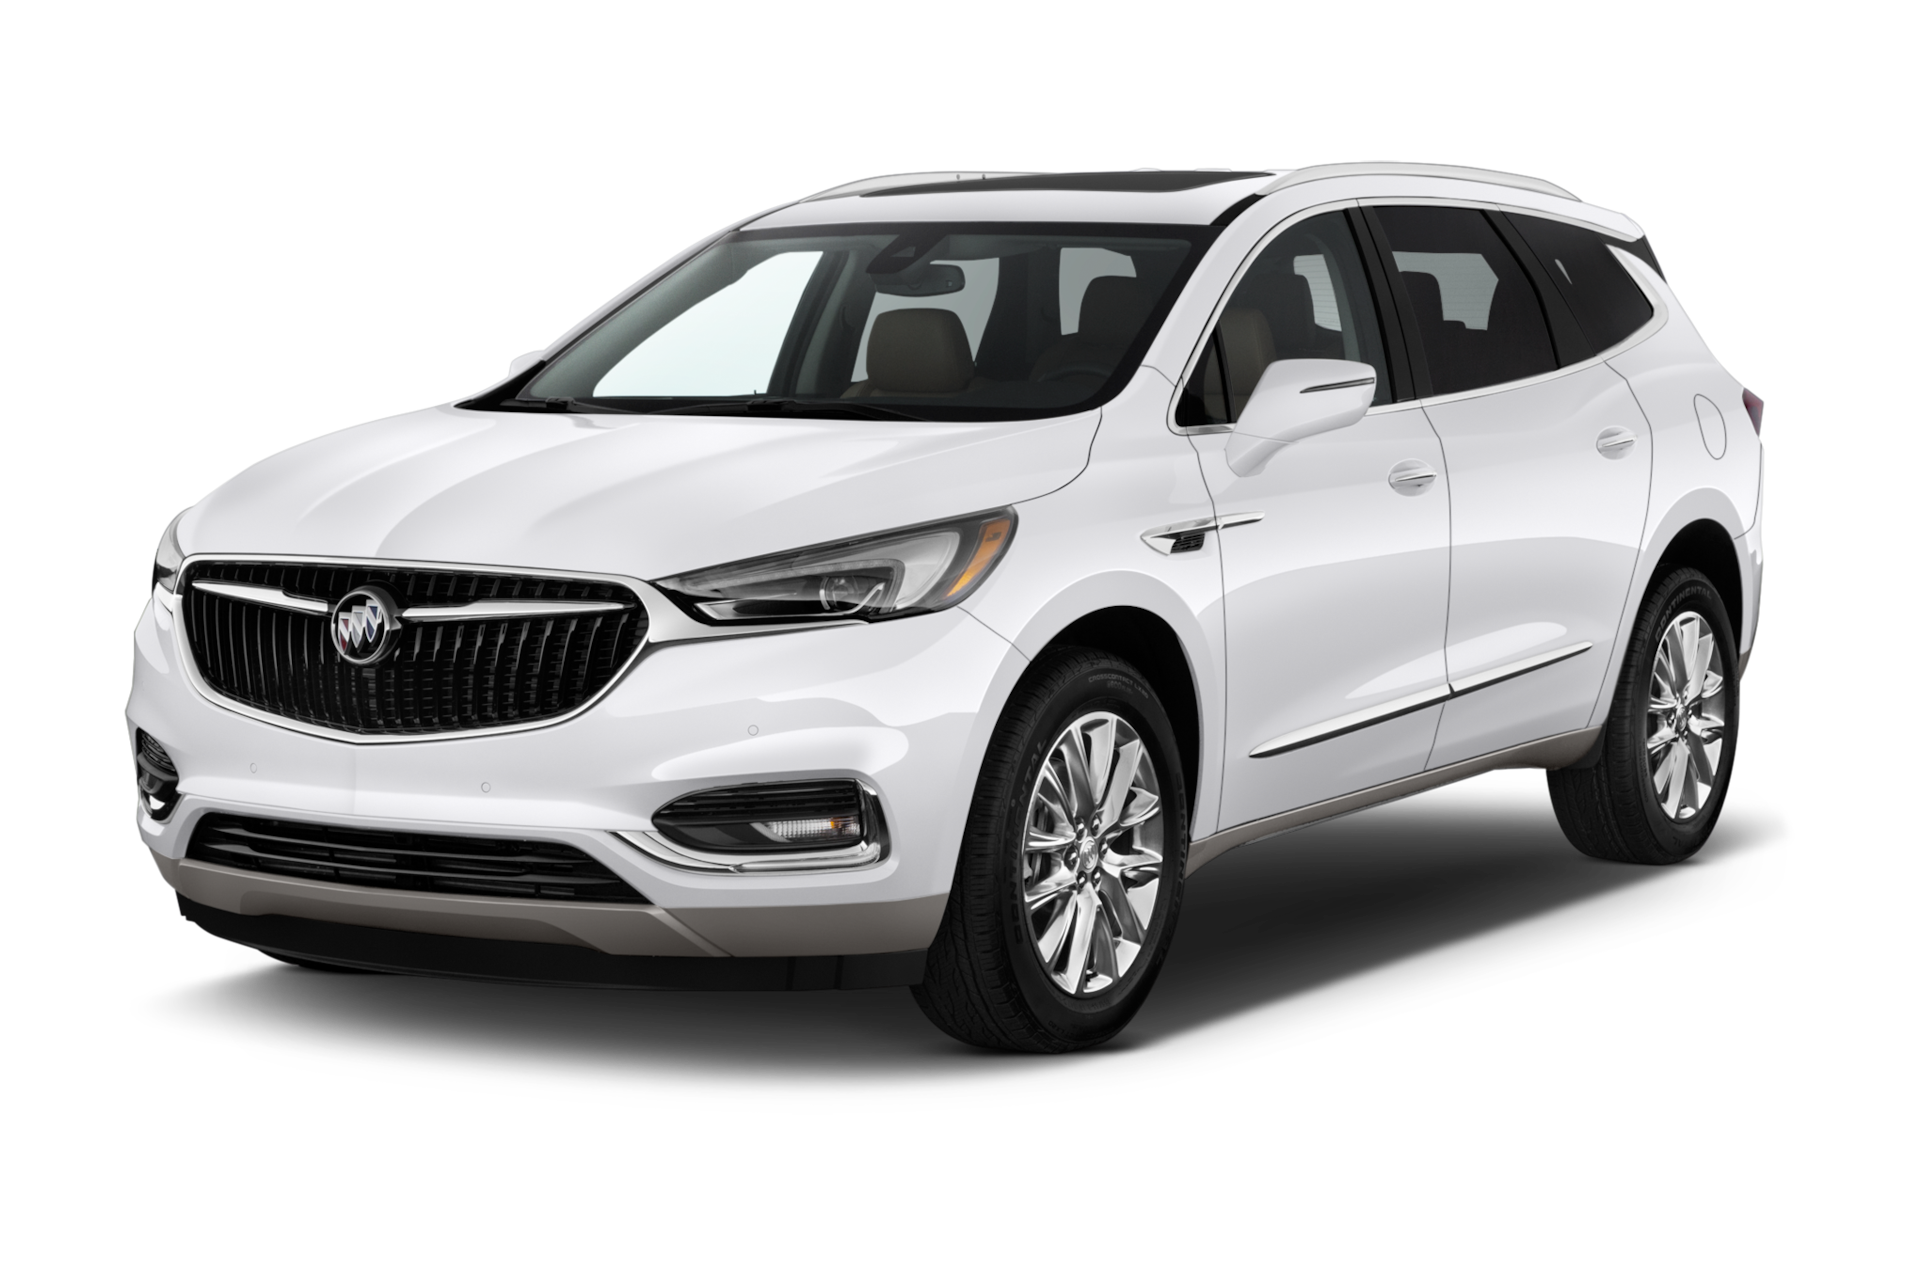 2019 Buick Enclave Prices, Reviews, and Photos - MotorTrend